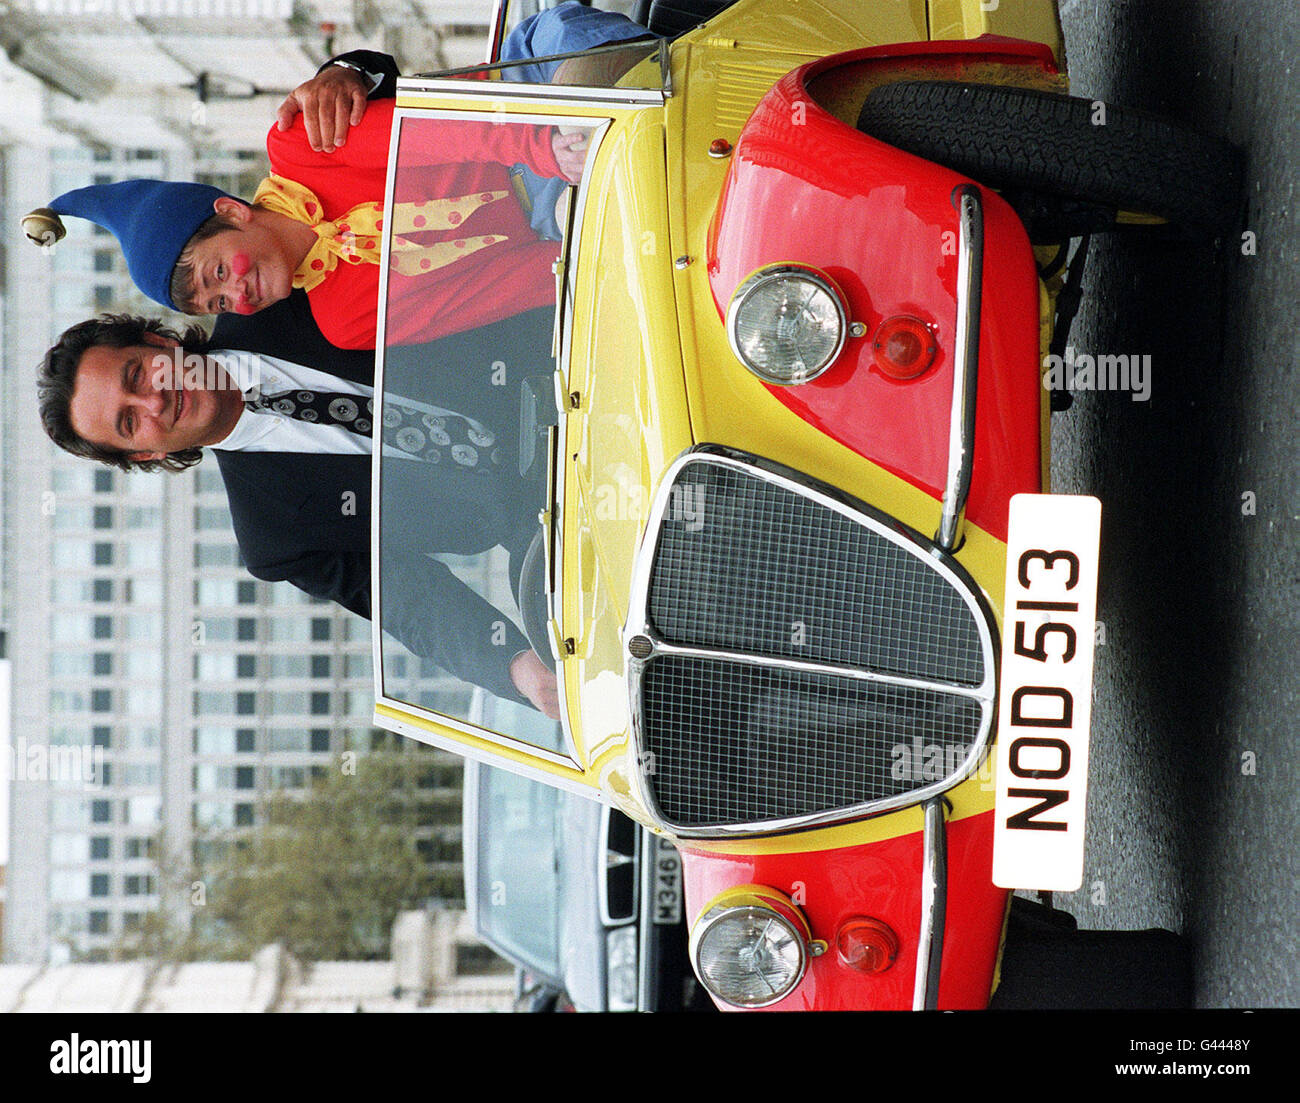 Chief executive officer of Tracadero plc, Nick Leslau, poses with 'Noddy' at a photocall in London where it was announced that the Enid Blyton Company, a subsidiary of Trocadero plc, and BBC Worldwide Ltd had reached agreement on a new partnership for the marketing of Noddy, one of Blyton's best known characters. Stock Photo